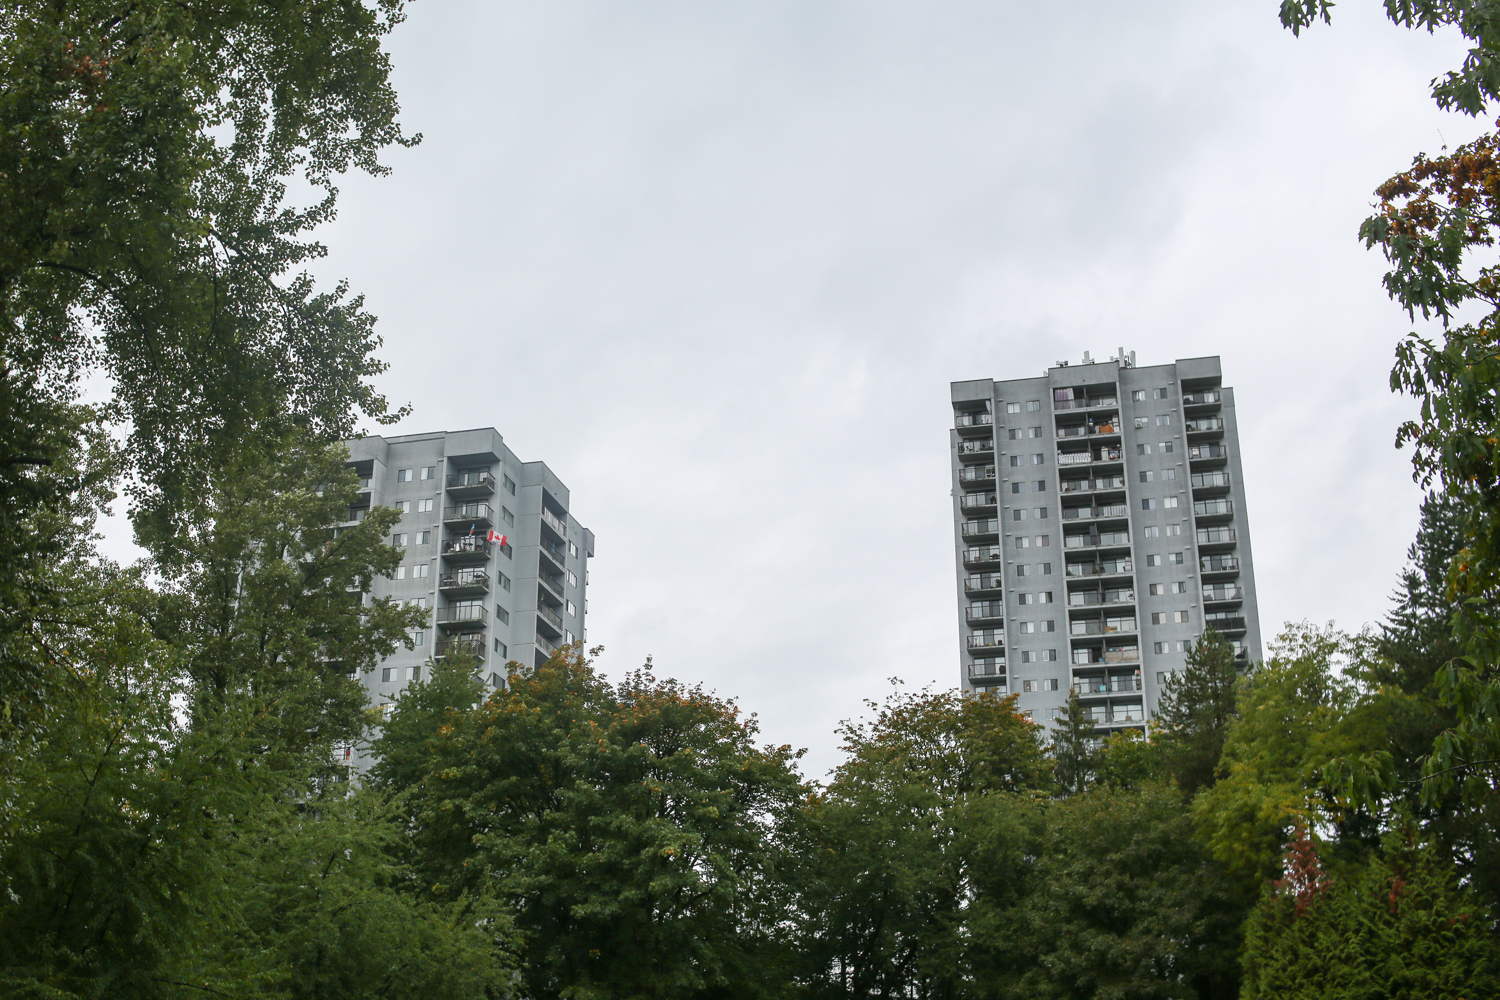 Two concrete towers, built in the early 1980s, rise up above a frame of trees. It’s a cloudy day.